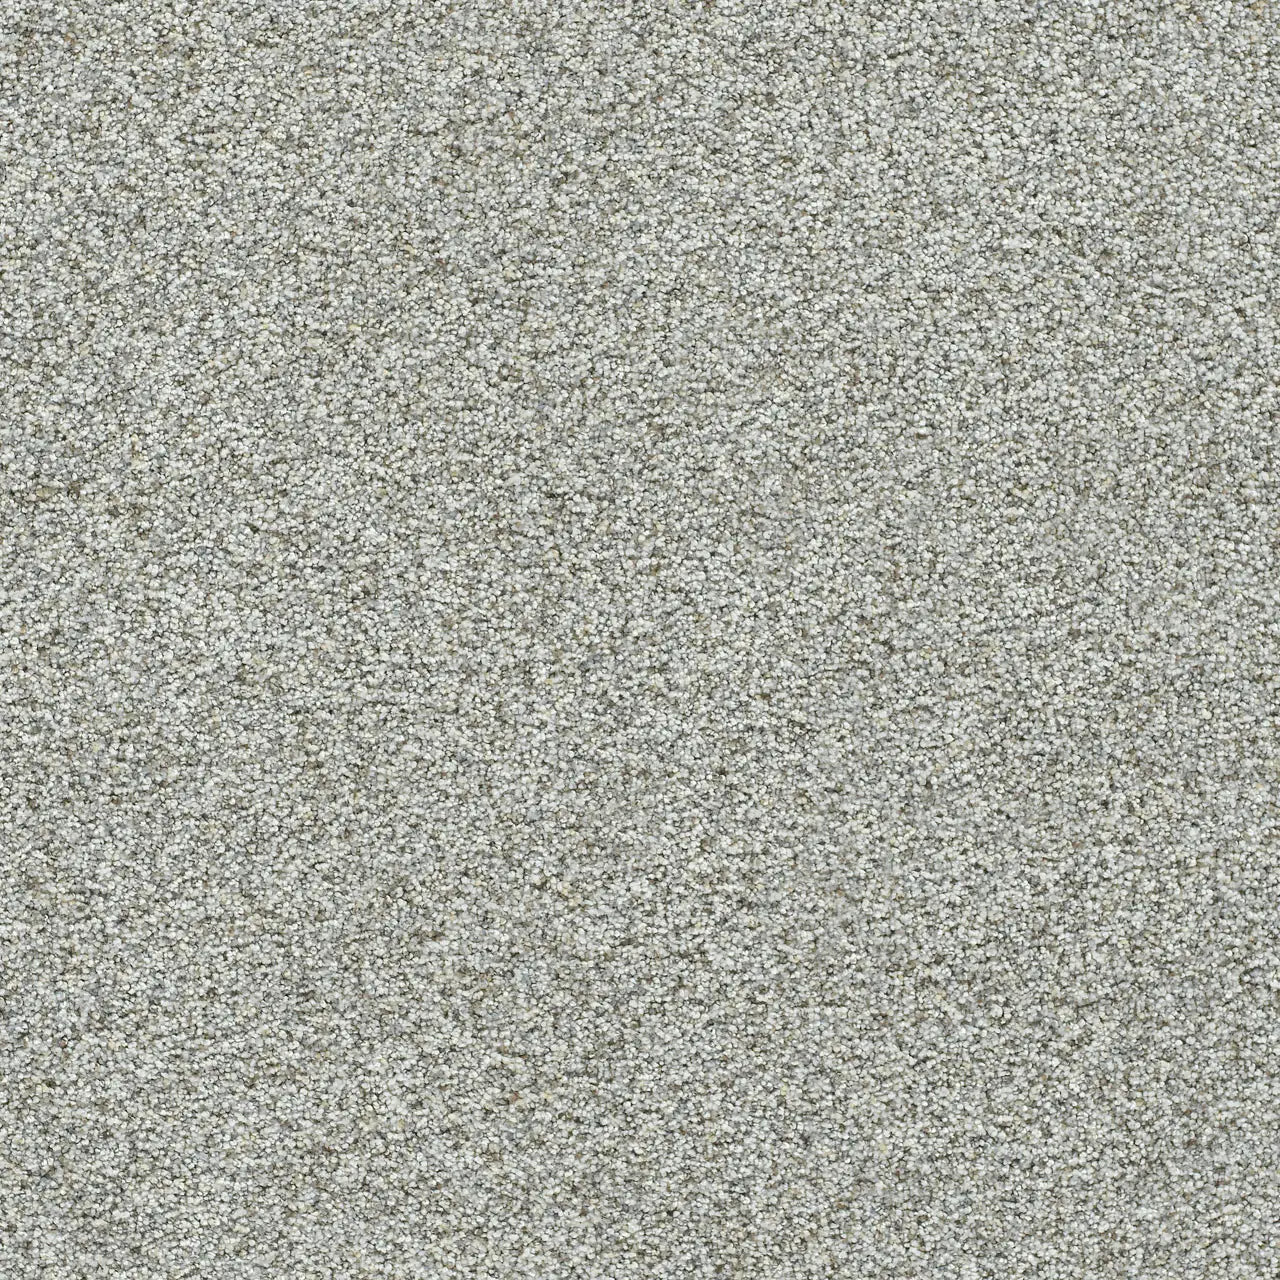 Luna by Dream Weaver Out of This World II Carpet at Calhoun's Flooring, Springfield, IL